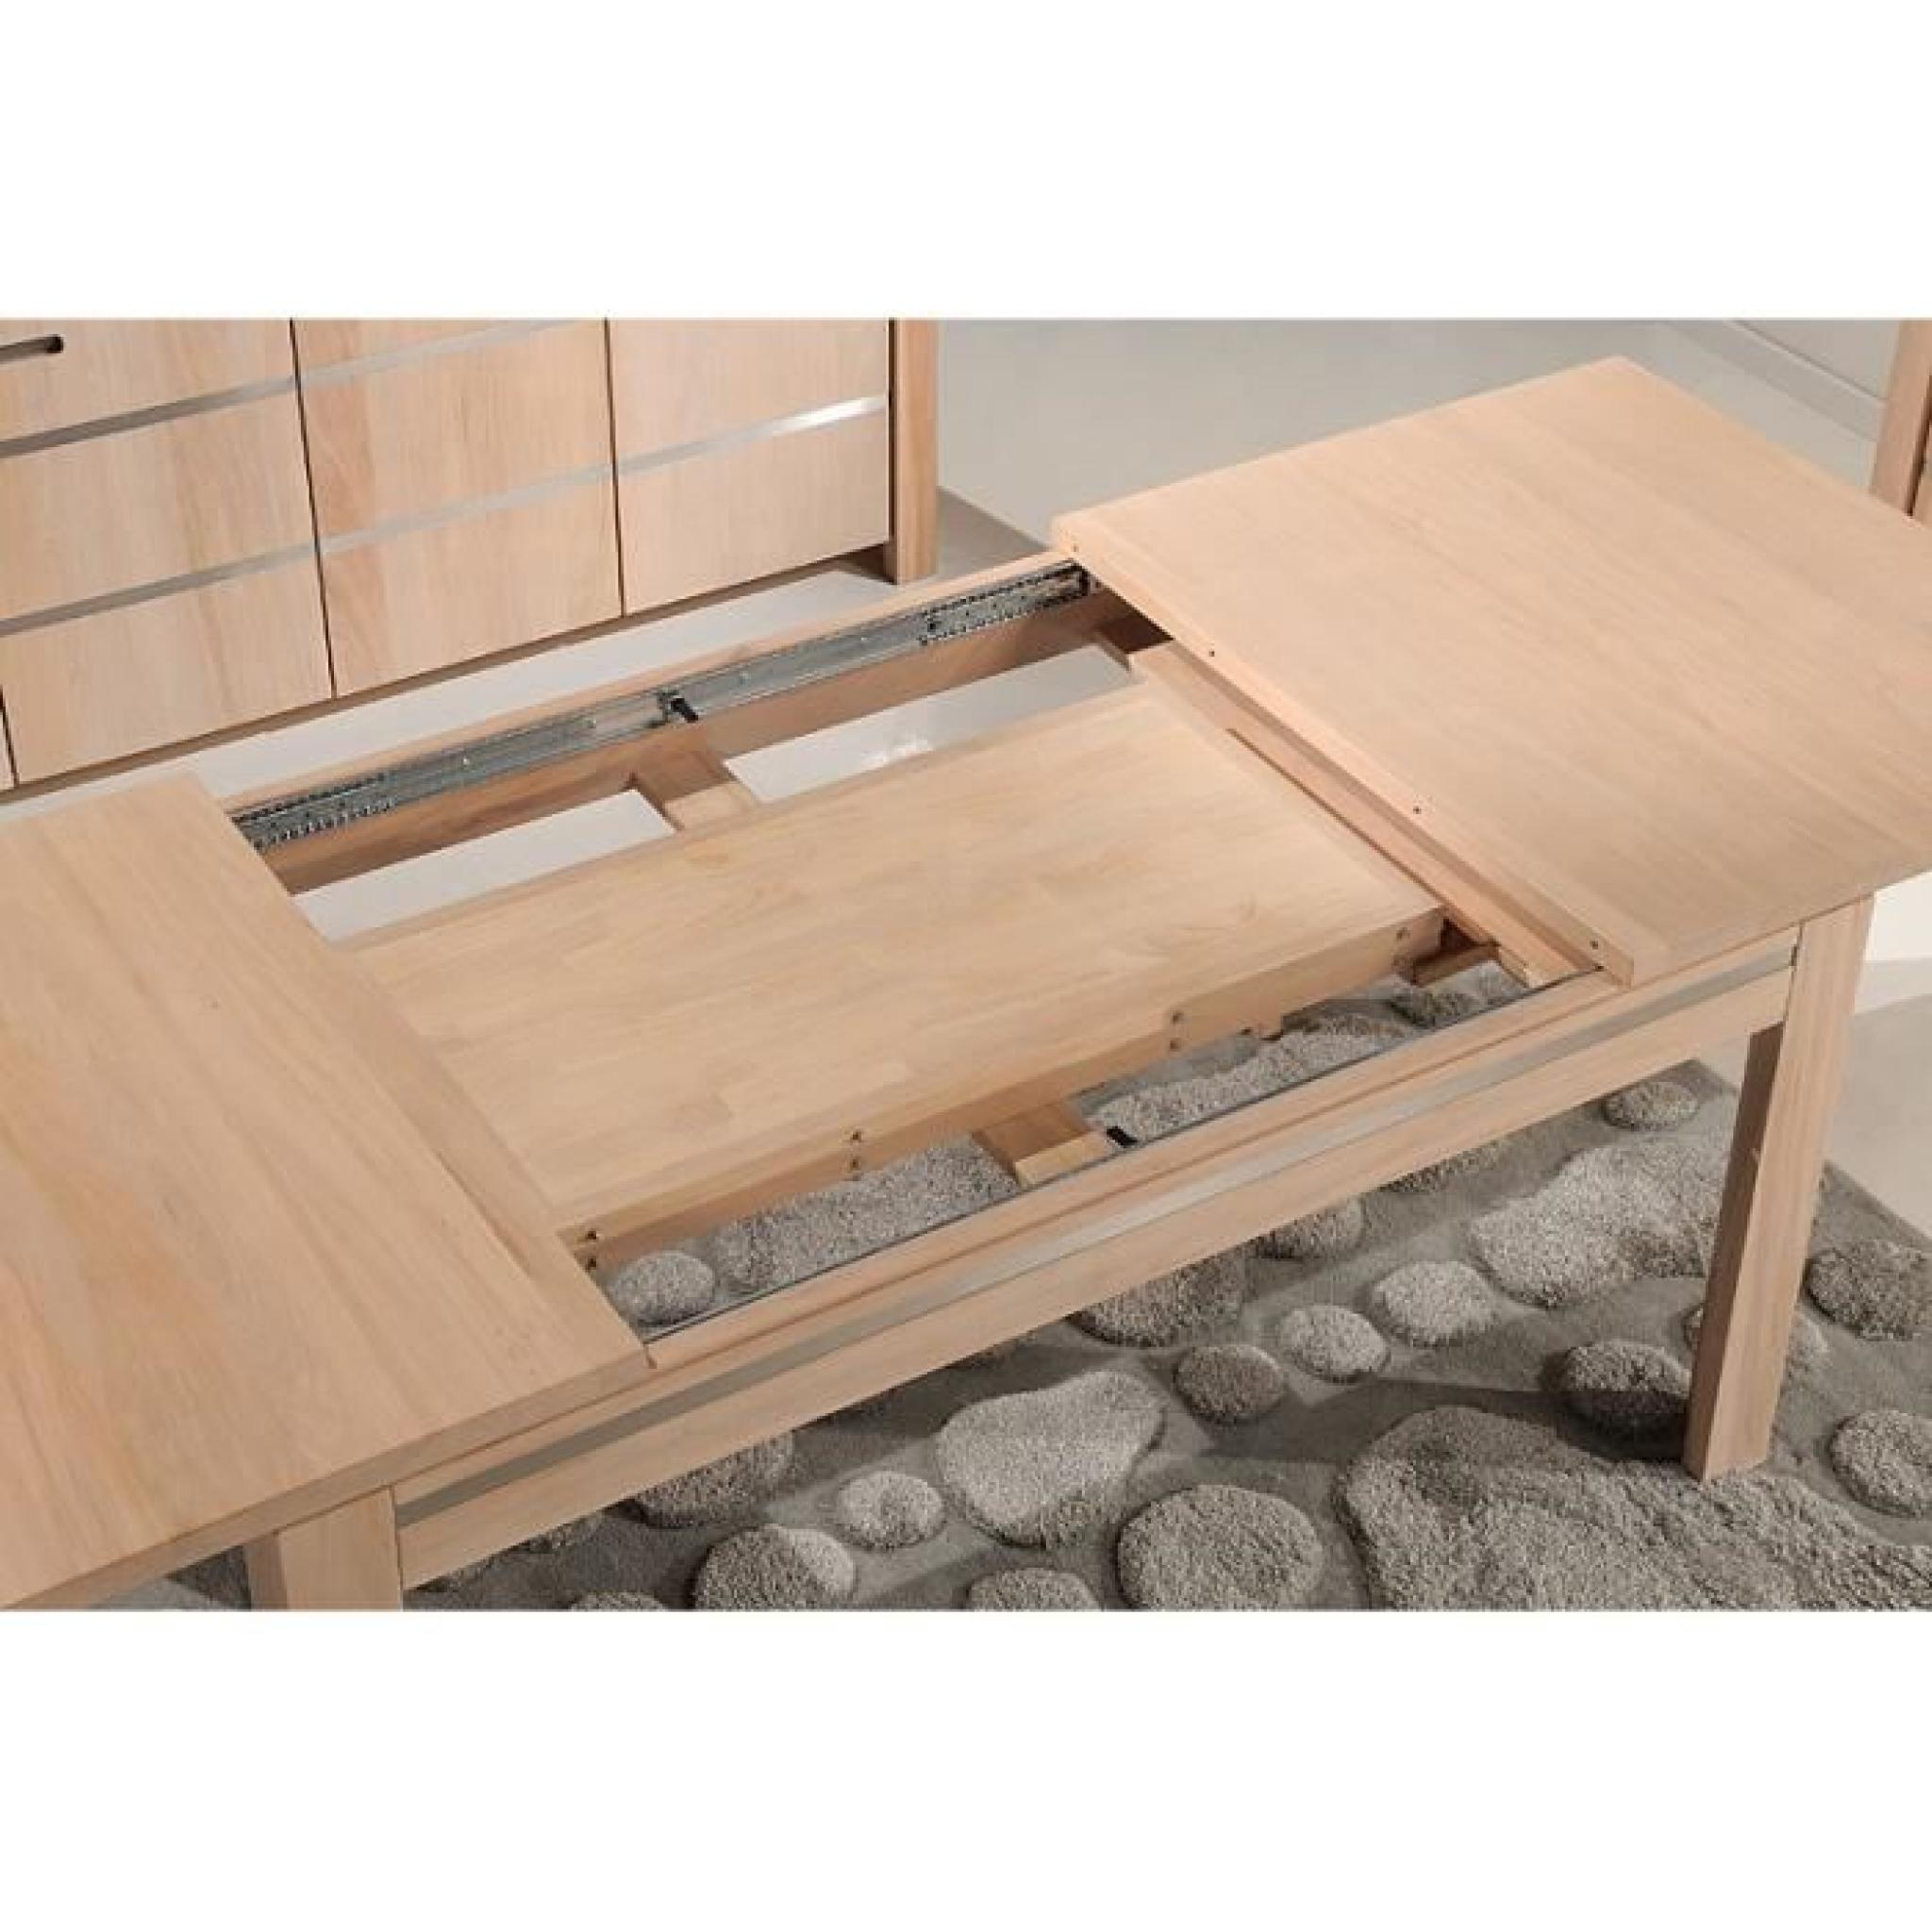 Table OPALE 160/95 ORME MASSIF-INOX (Orme - Satiné) pas cher